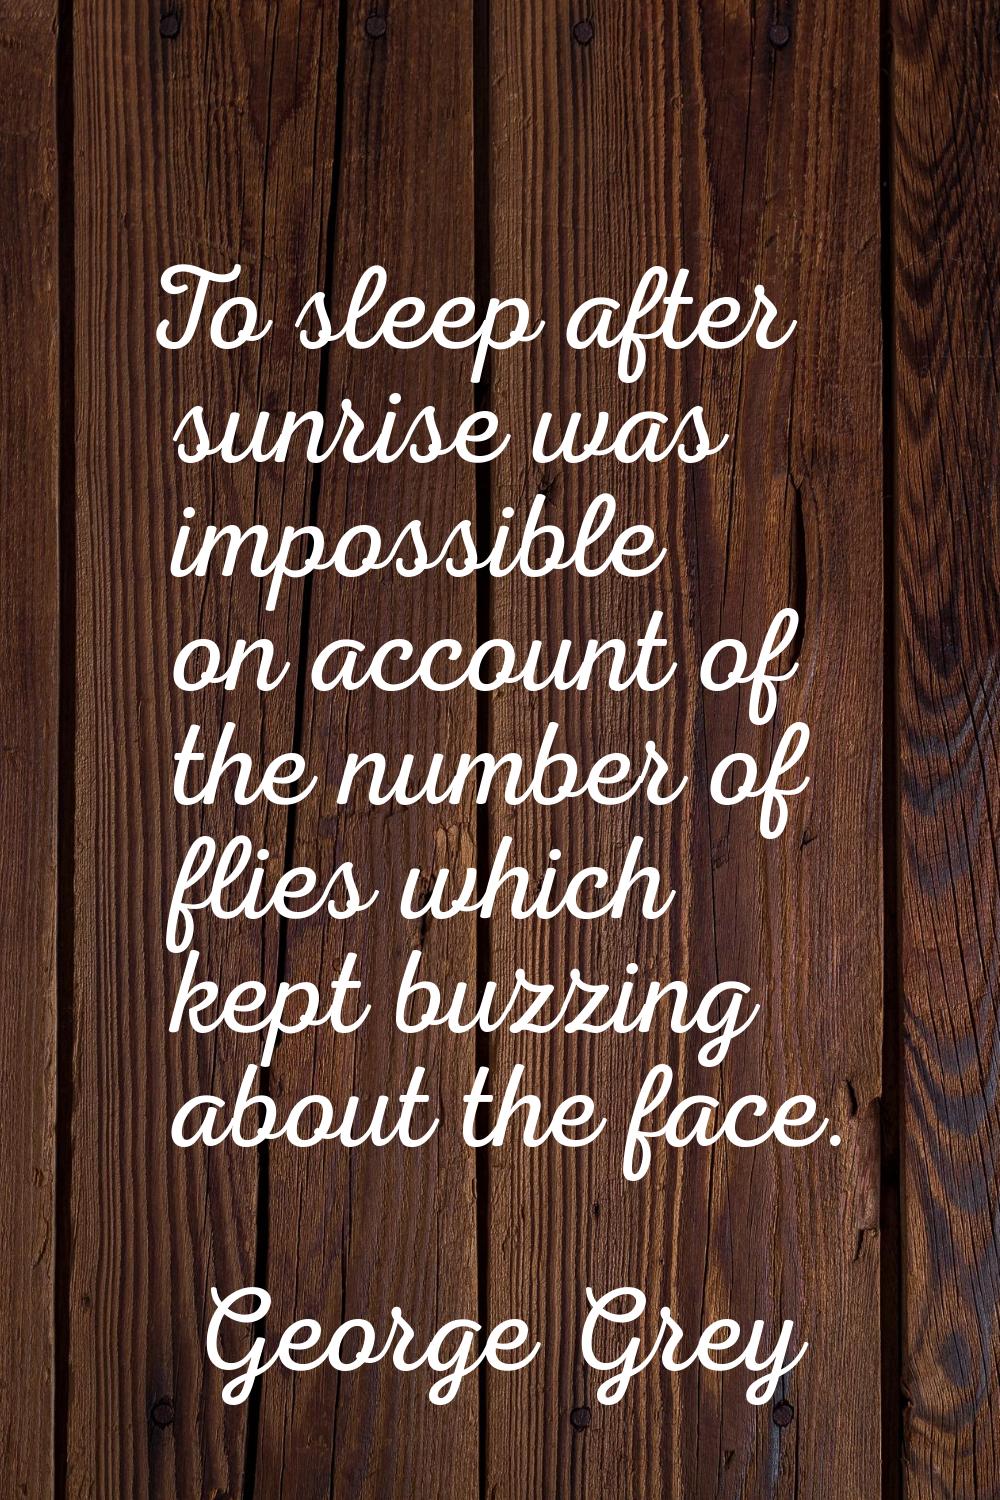 To sleep after sunrise was impossible on account of the number of flies which kept buzzing about th